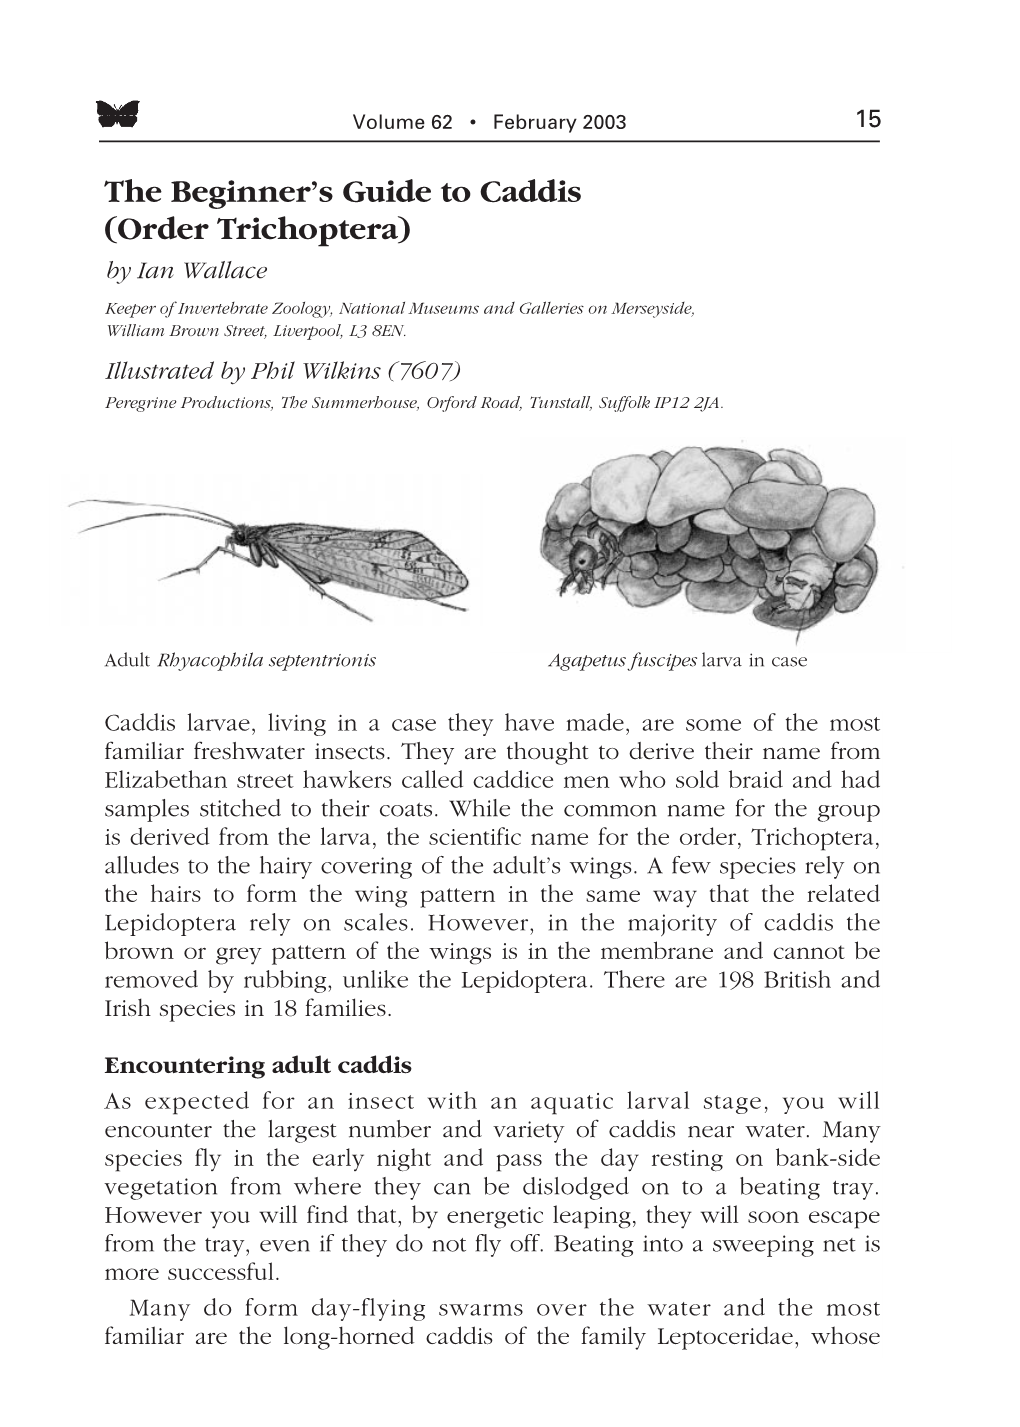 The Beginner's Guide to Caddis (Order Trichoptera)